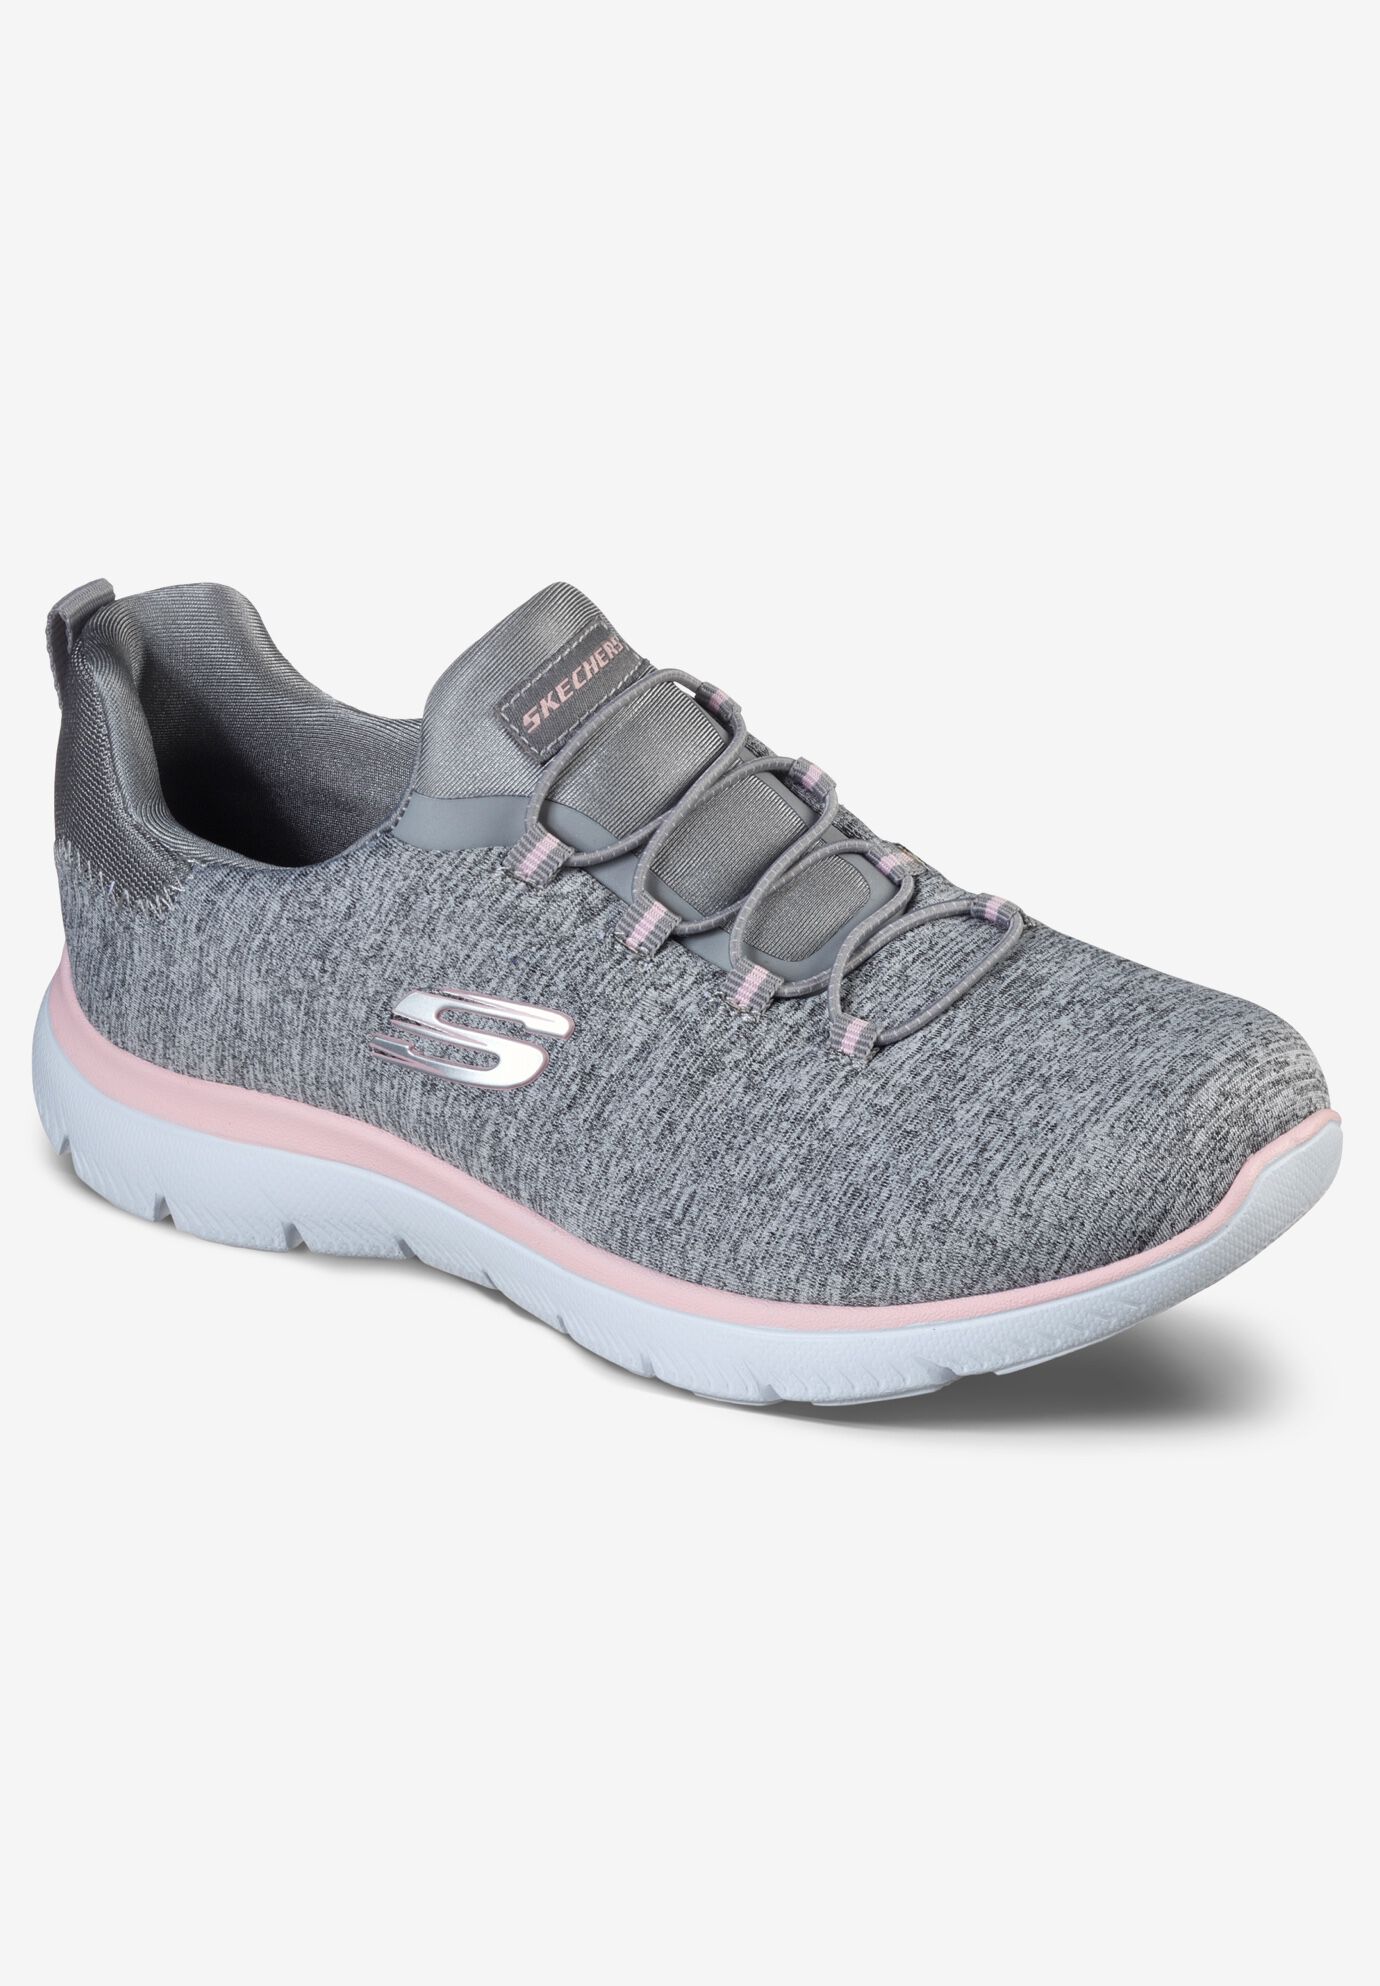 Skechers Wide Fit Shoes \u0026 Sneakers for 